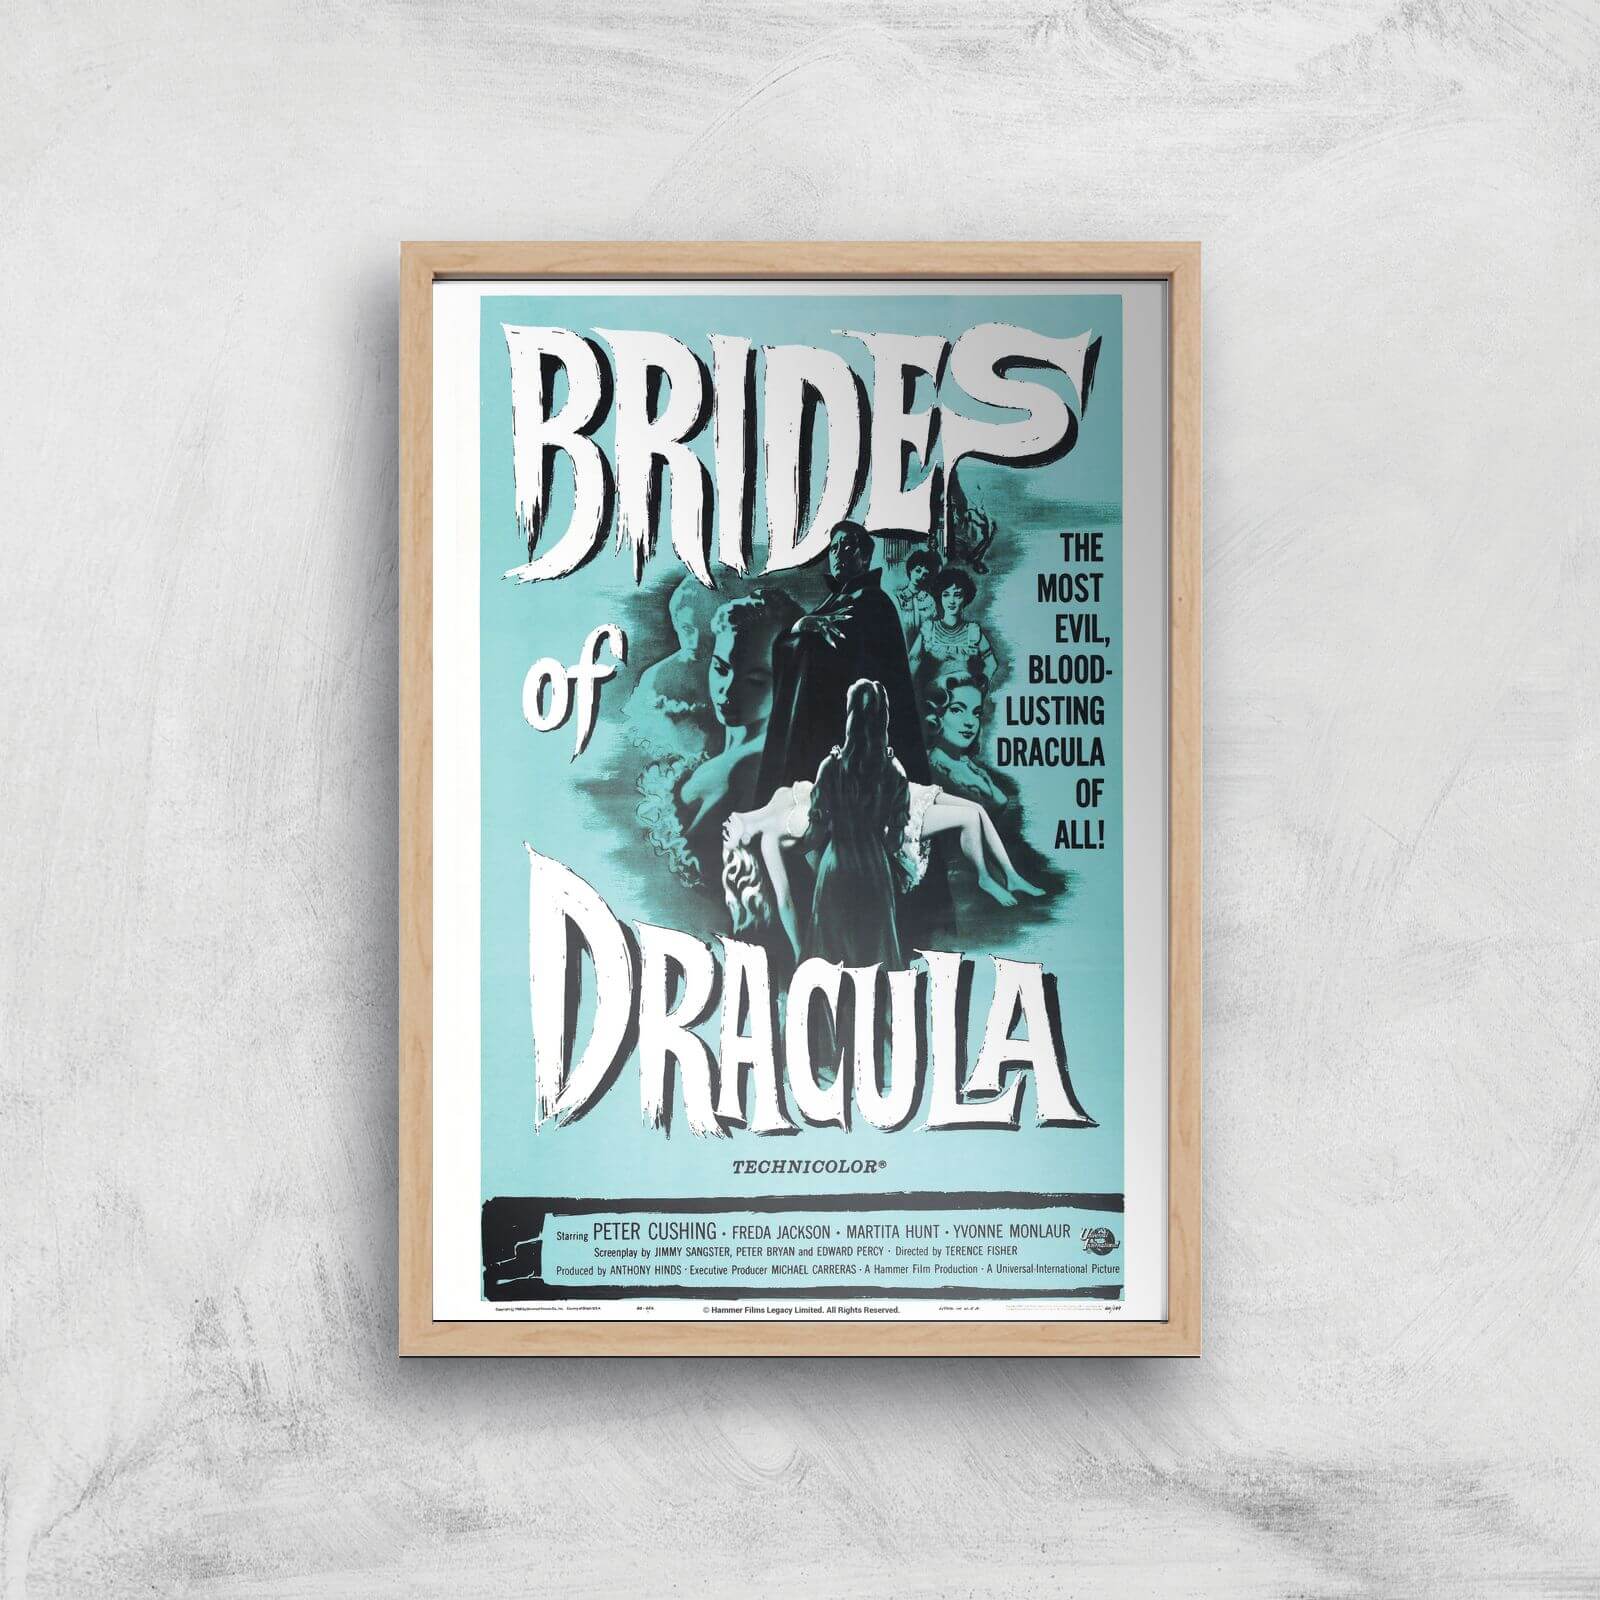 Brides Of Dracula Giclee Art Print - A3 - Wooden Frame